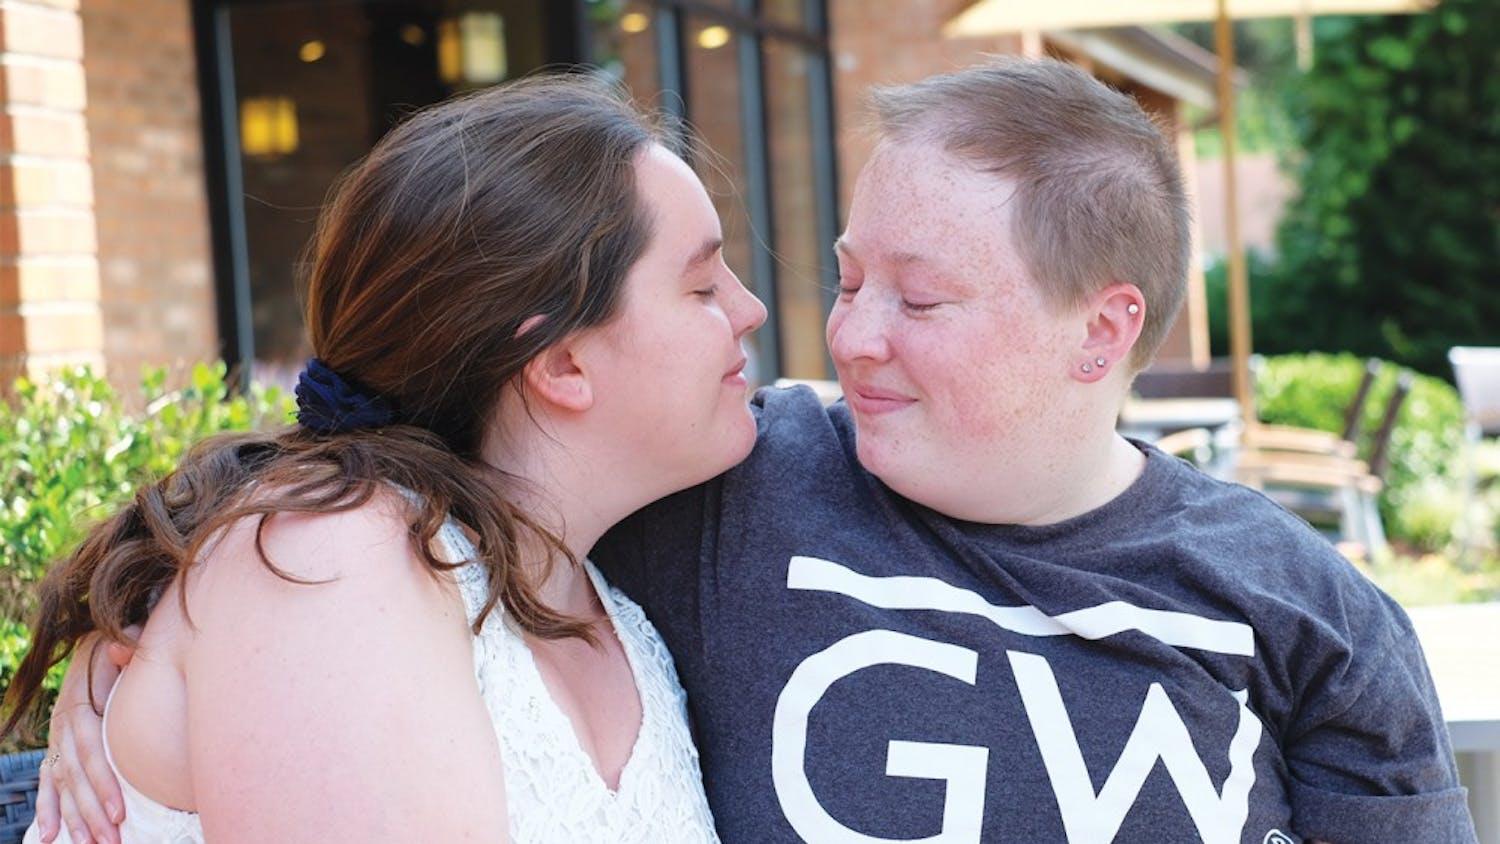 Danielle Martin (left) and Katy Folk pose in front of Caribou Coffee on June 30. Martin and Folk plan to get married in North Carolina in May 2016.